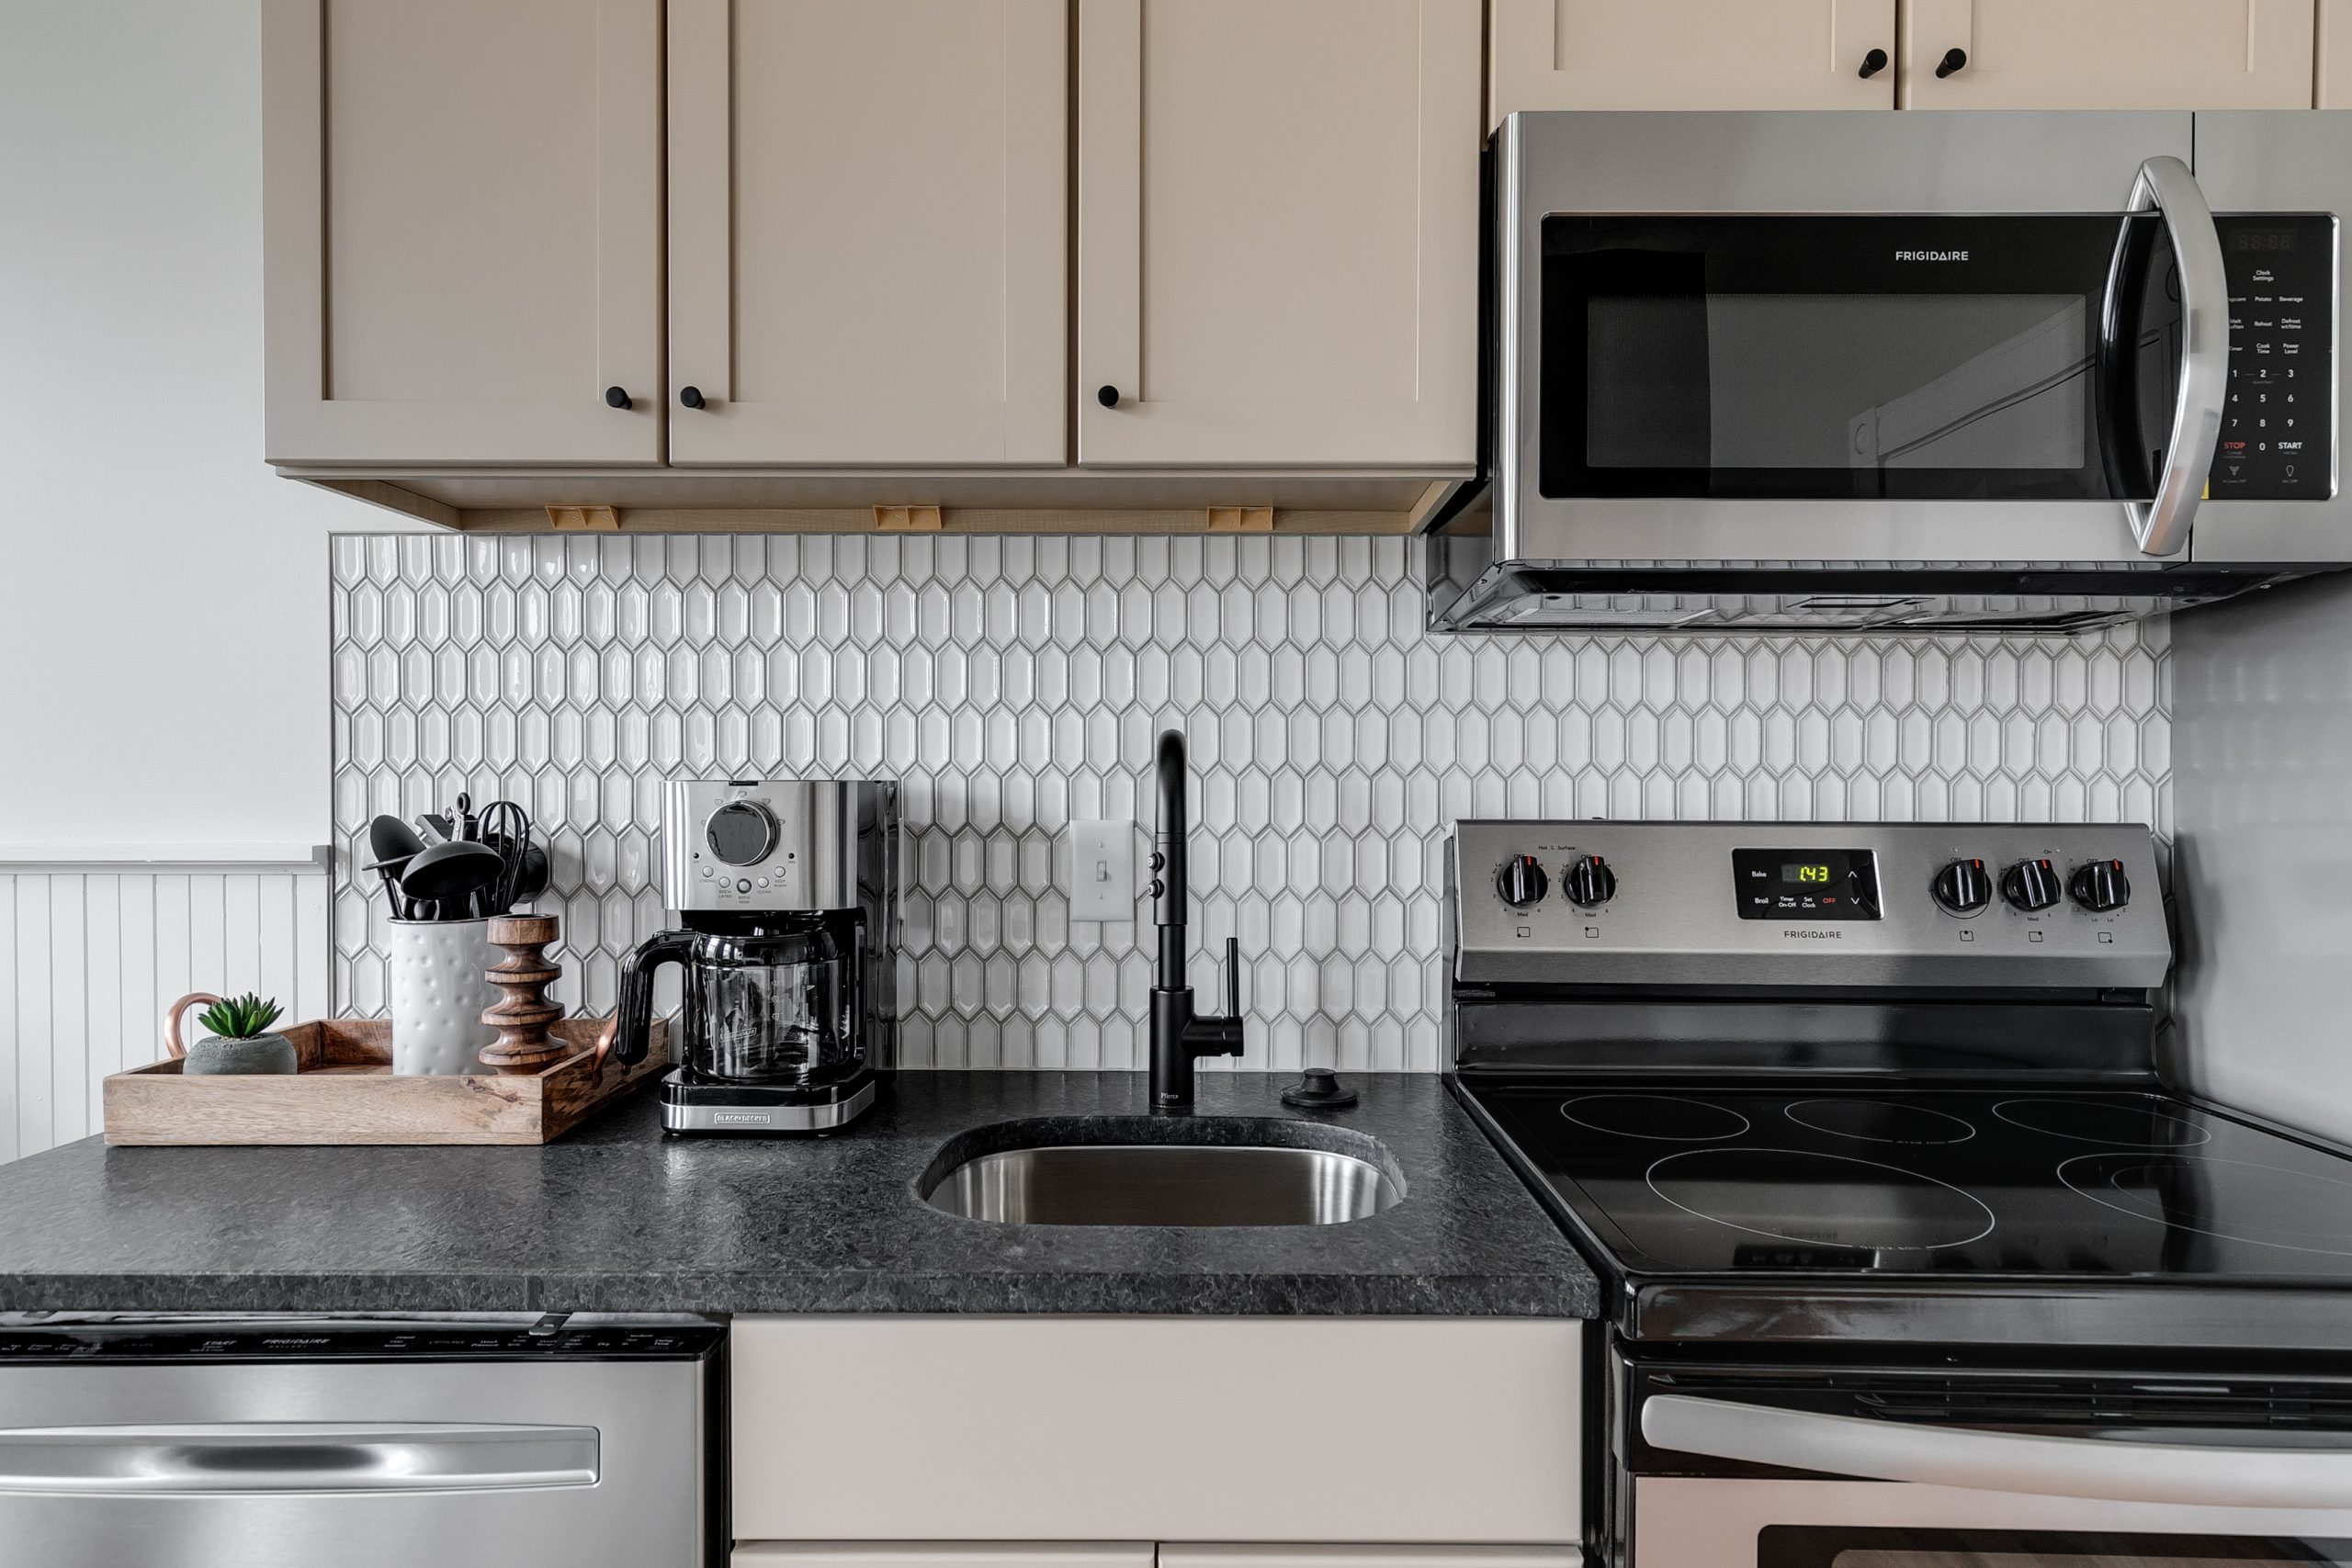 A stylish fully-equipped kitchen with brushed black hardware, cream cabinets, silver appliances, and a white backsplash tiling